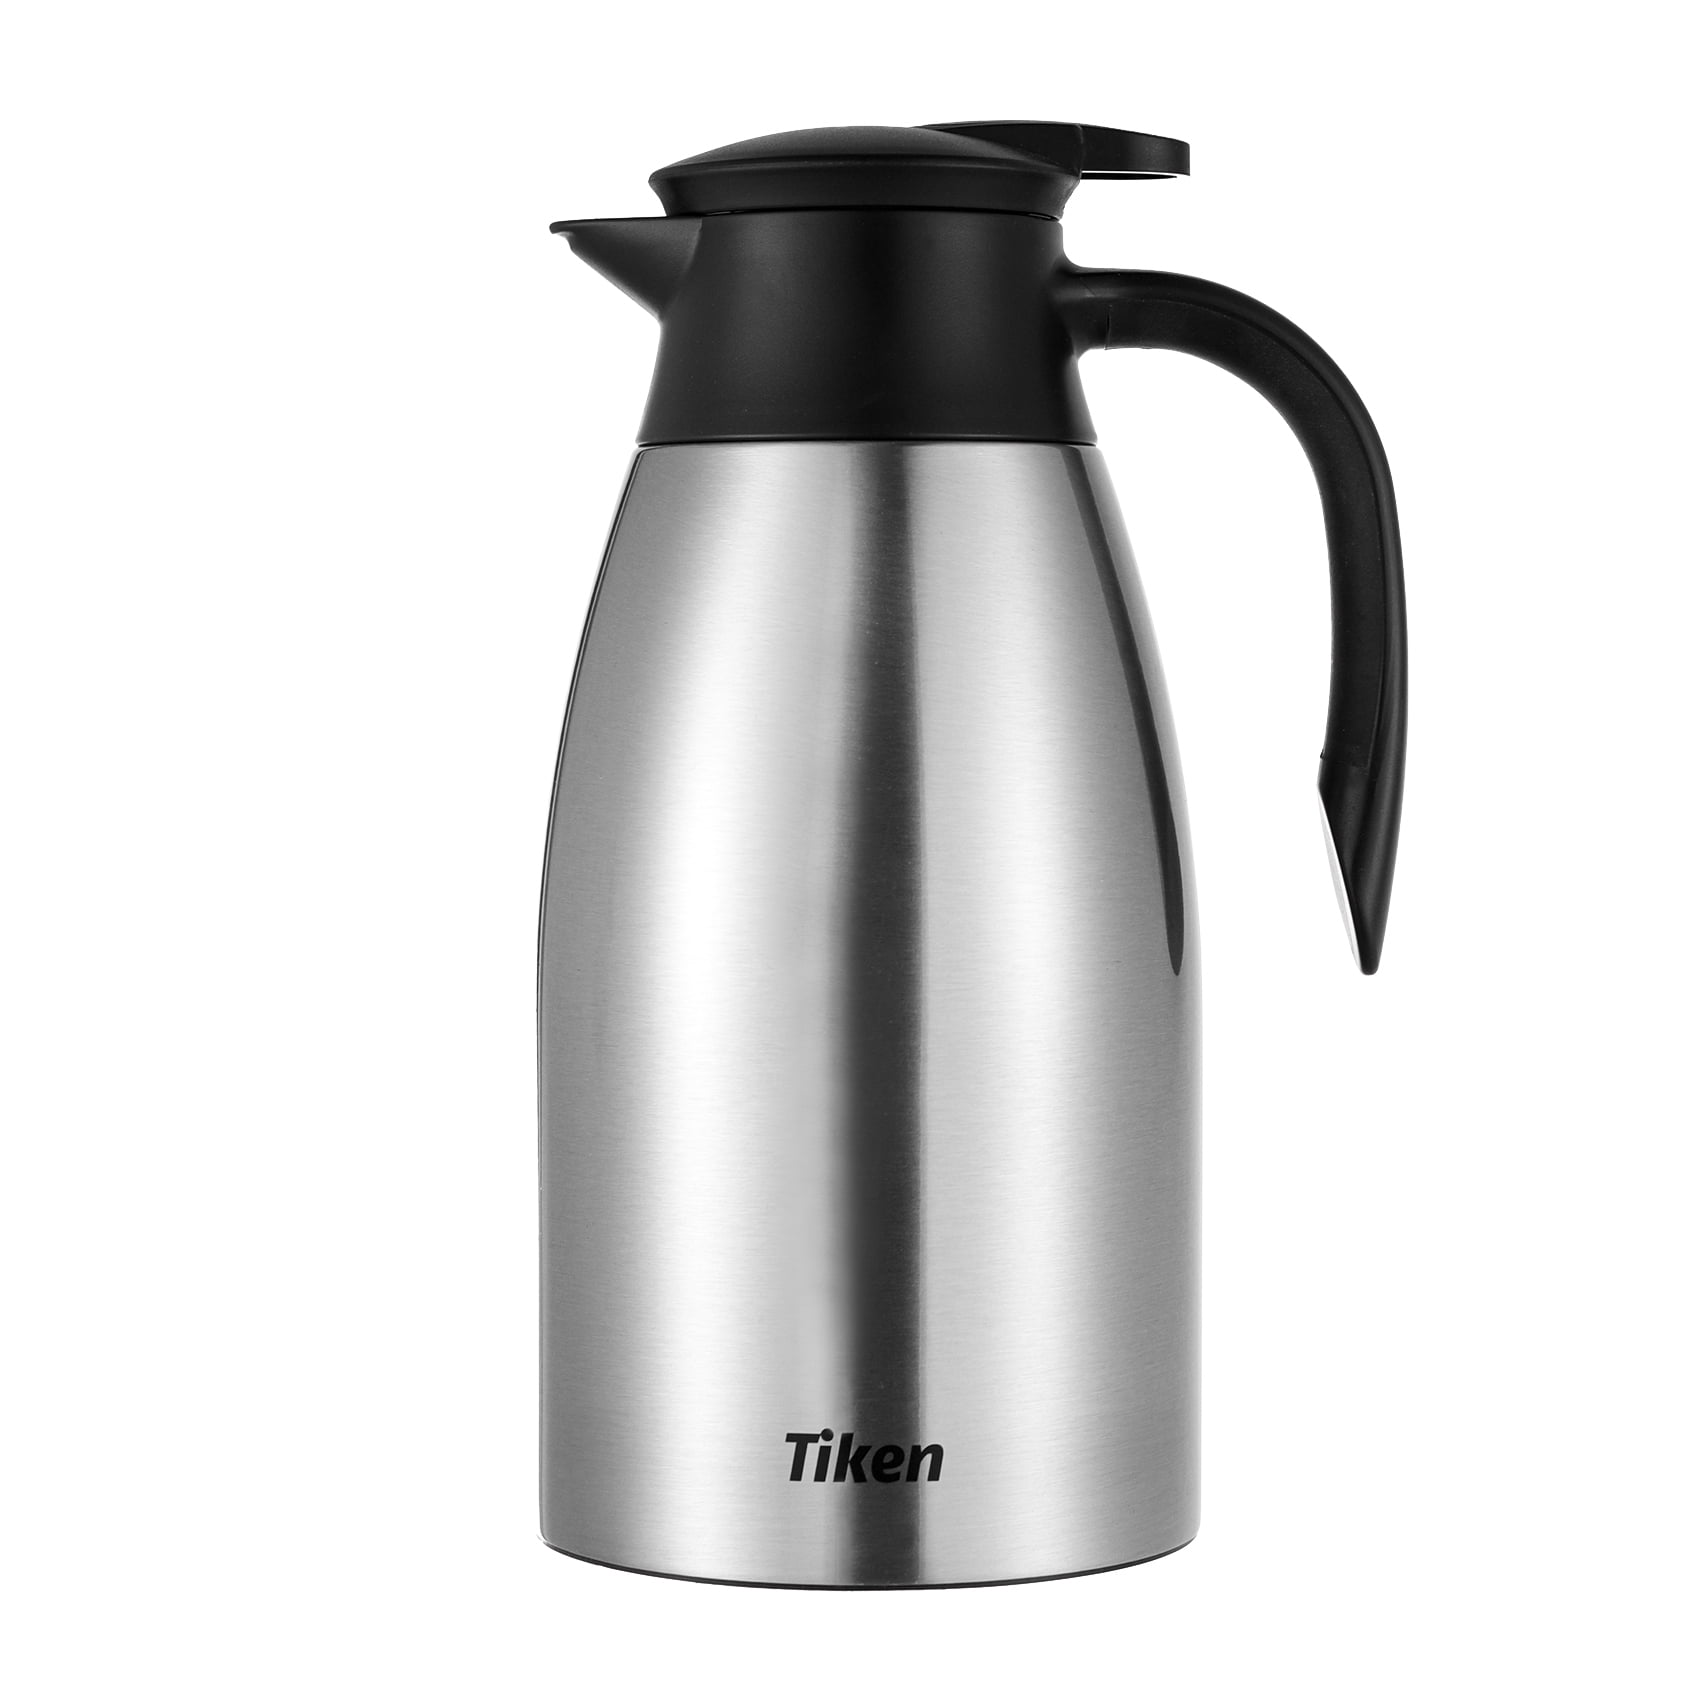  Pykal Thermal Coffee Carafe - with ThermaClick Lid, 68 oz  Capacity, Lab Tested 8 Hour 150F Heat Retention, Surgical Rust Resistant Stainless  Steel, Long Handle Brush Included Inside: Home & Kitchen